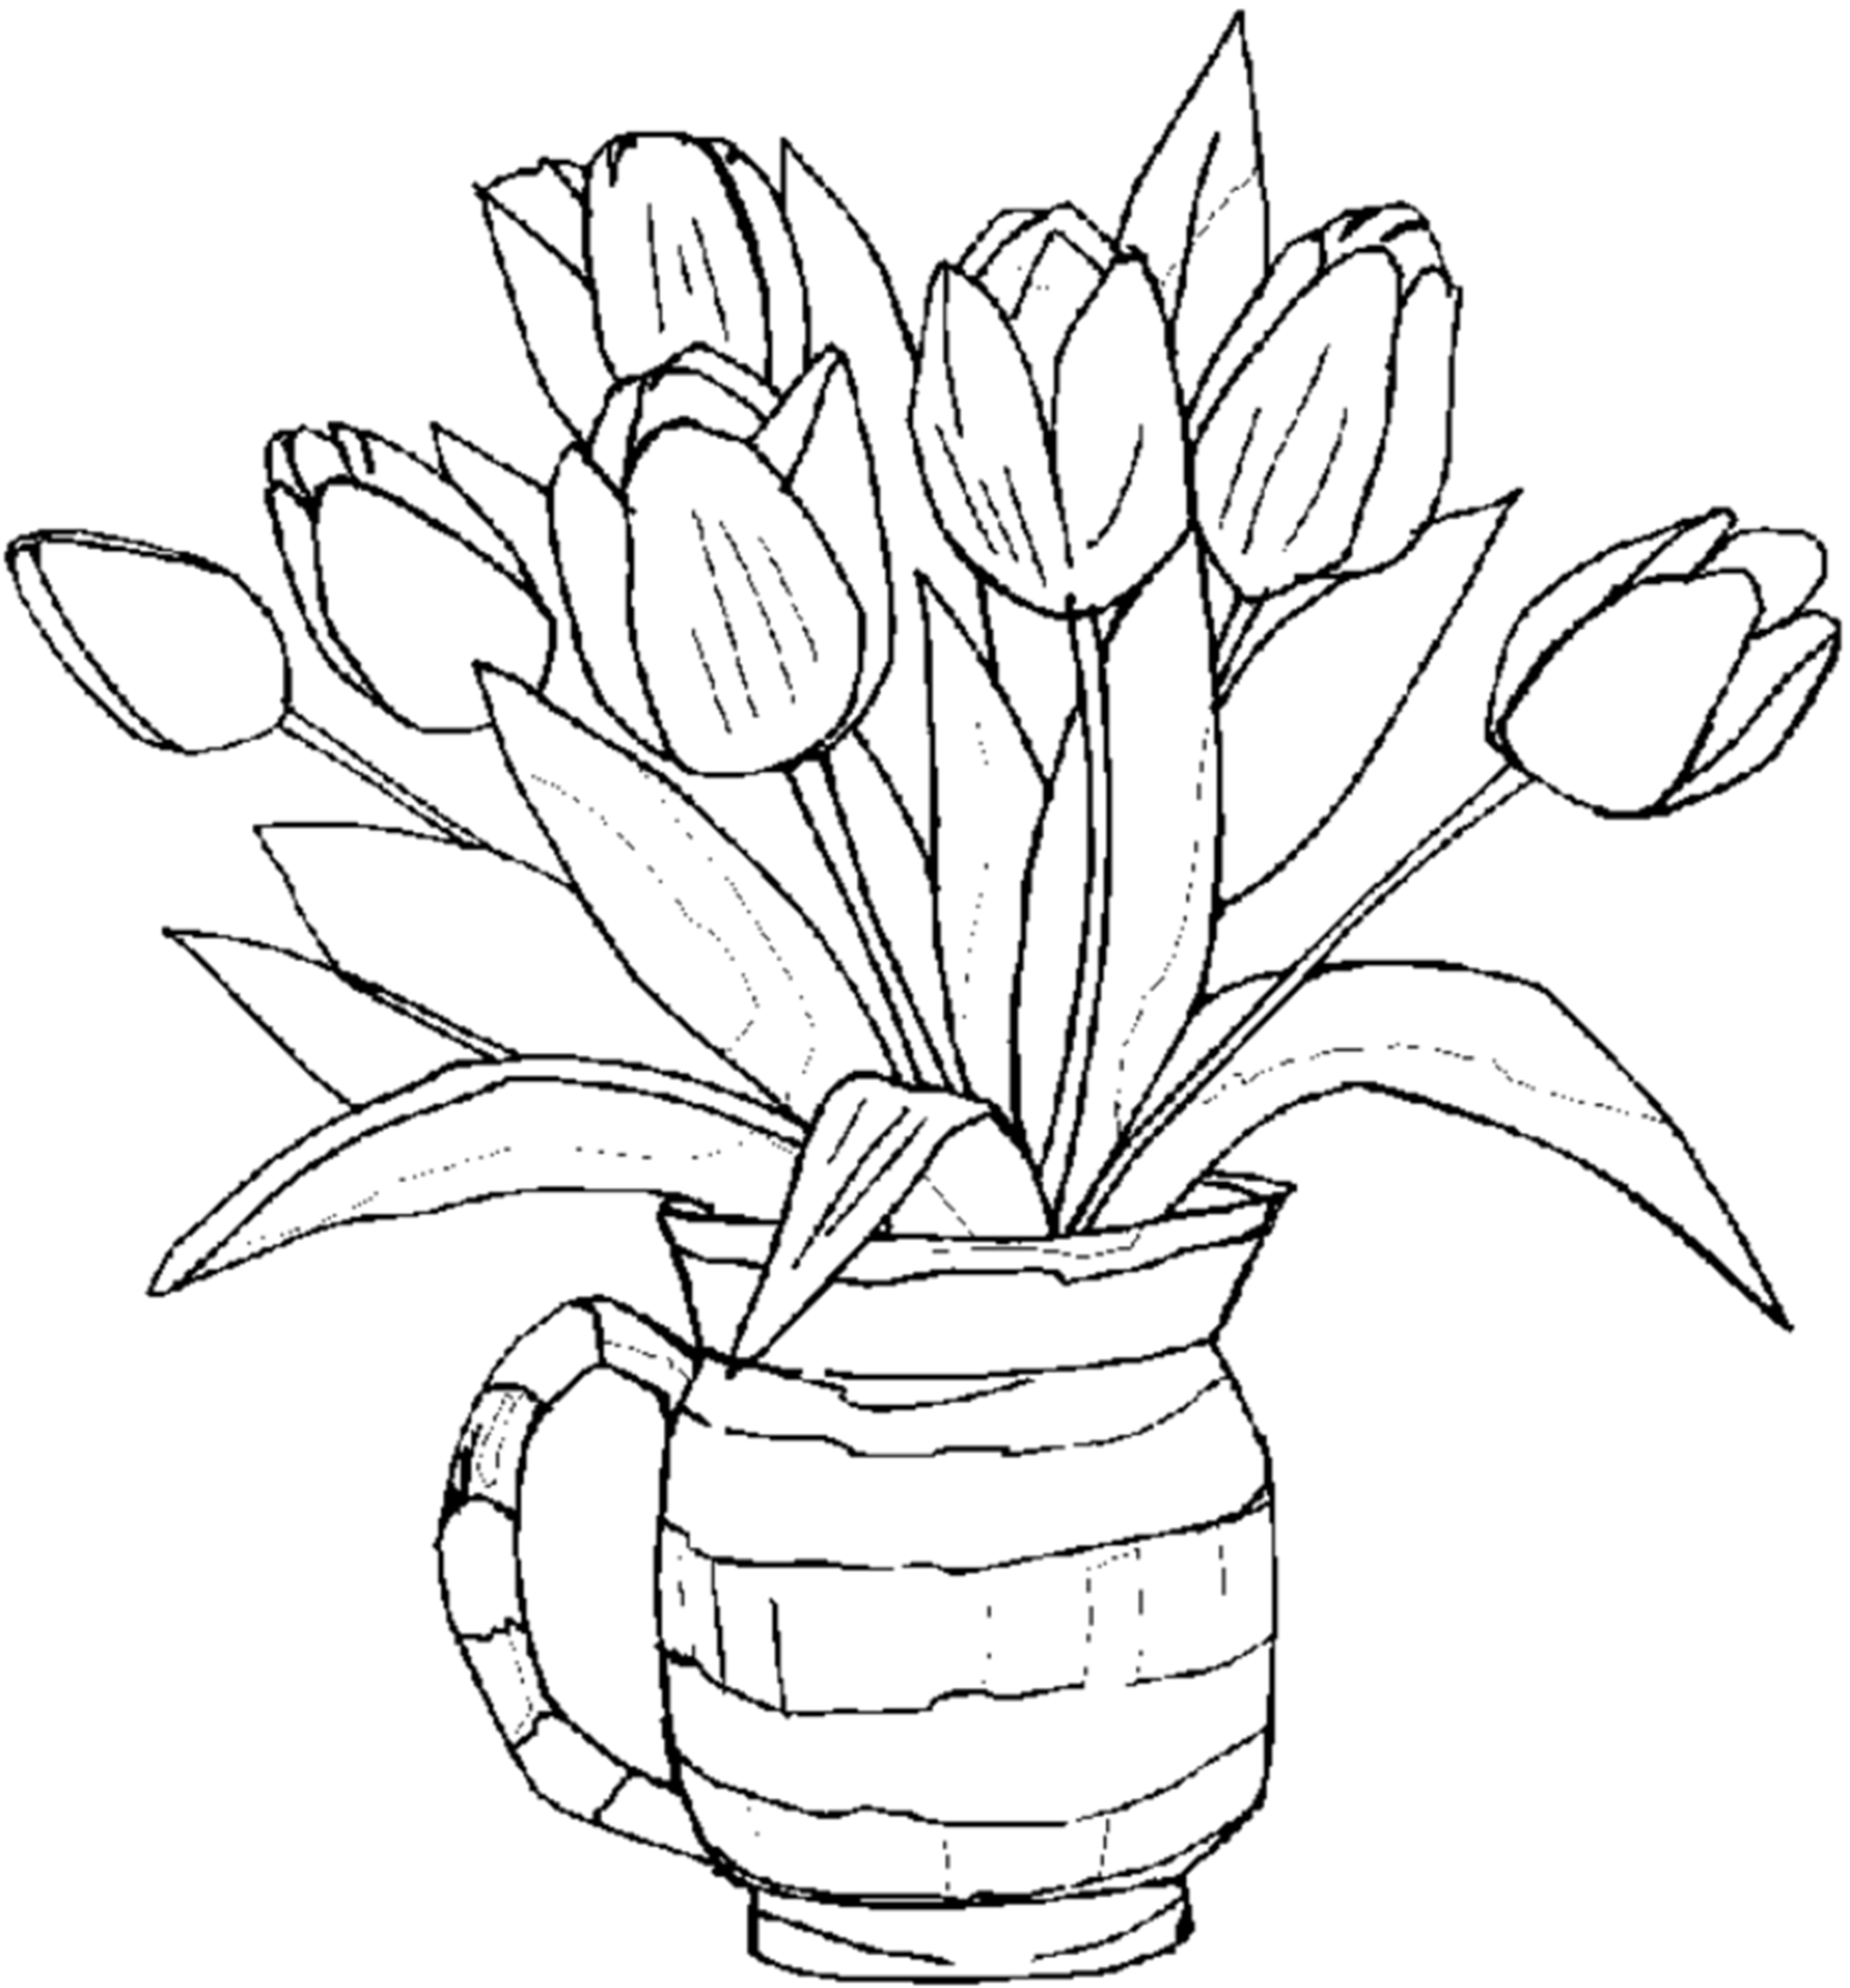 209 Cartoon Free Online Coloring Pages To Print with Printable